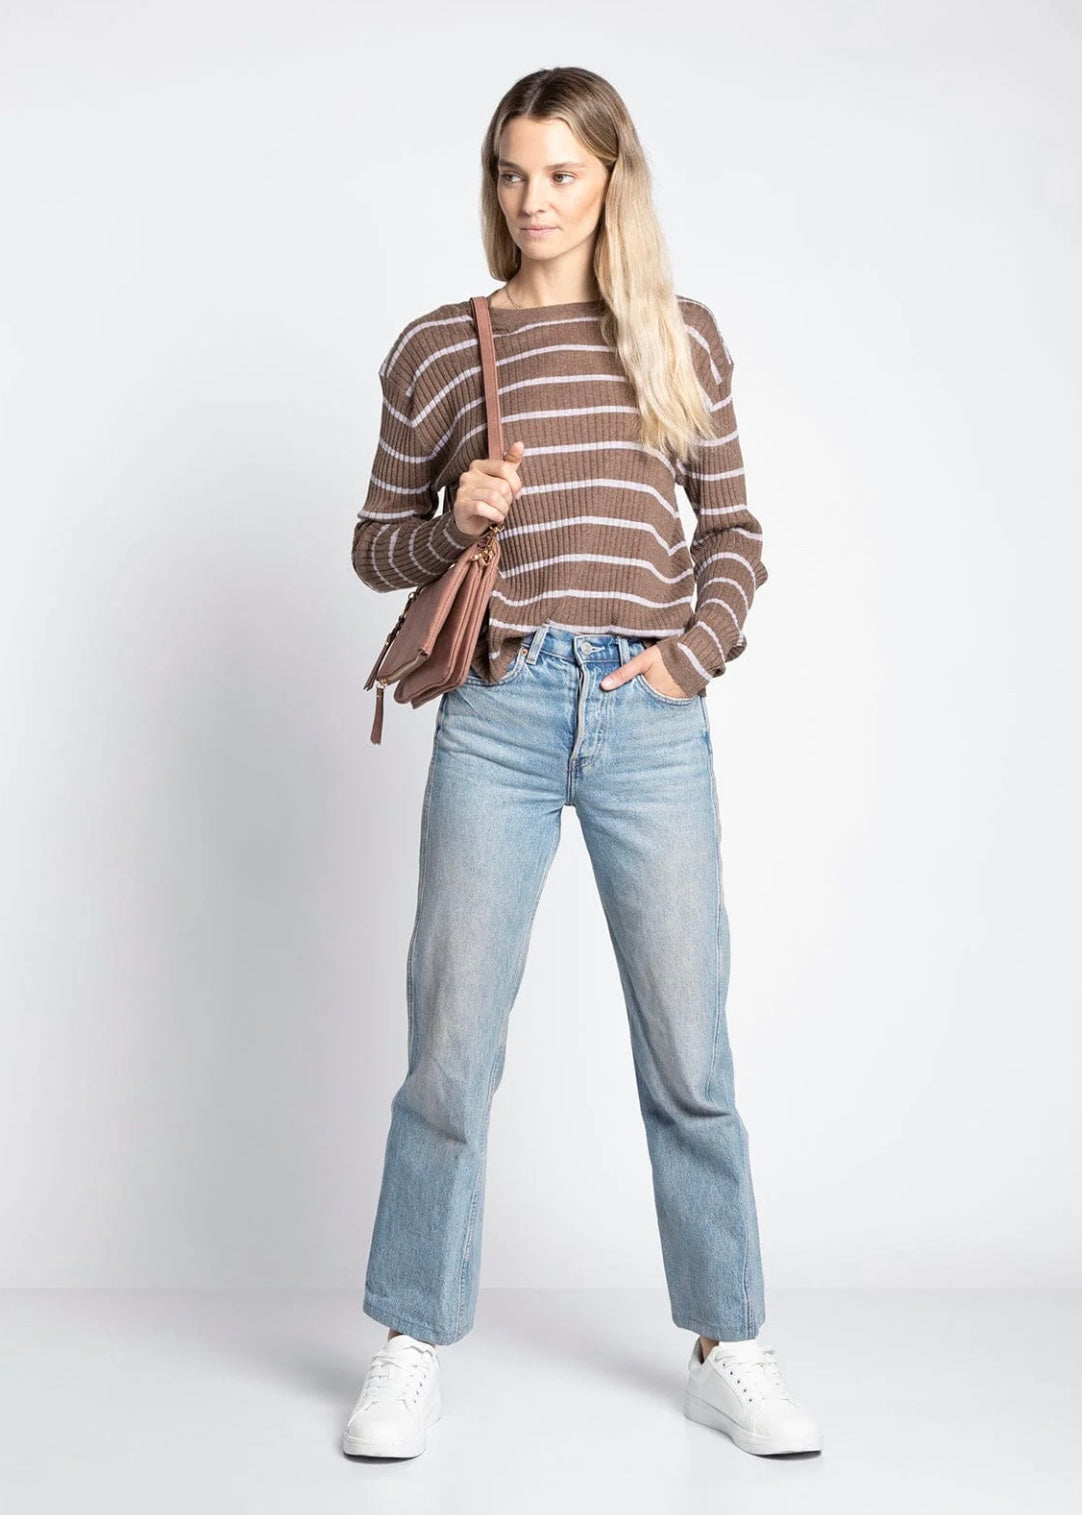 Raleigh Top in Flax Stone Stripe